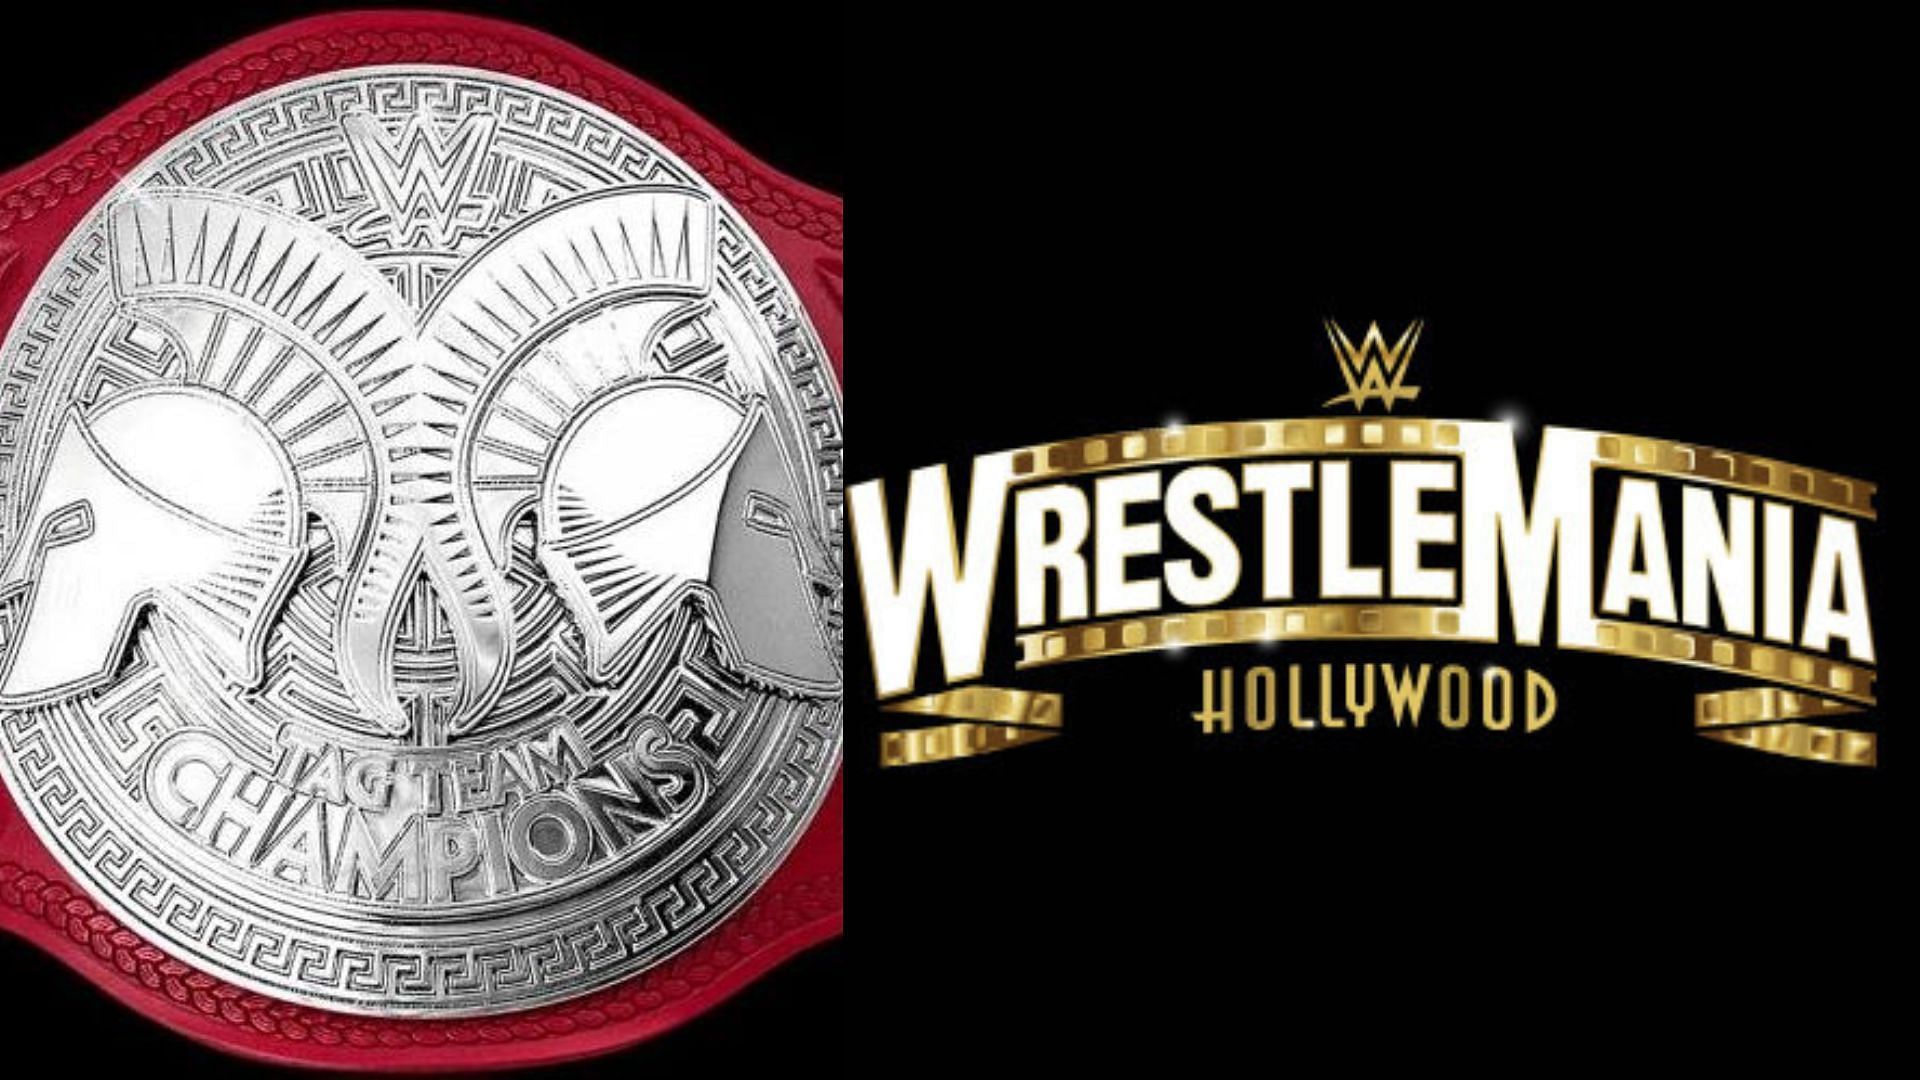 WWE WrestleMania 39 Night 1 airs live tonight in Los Angeles.